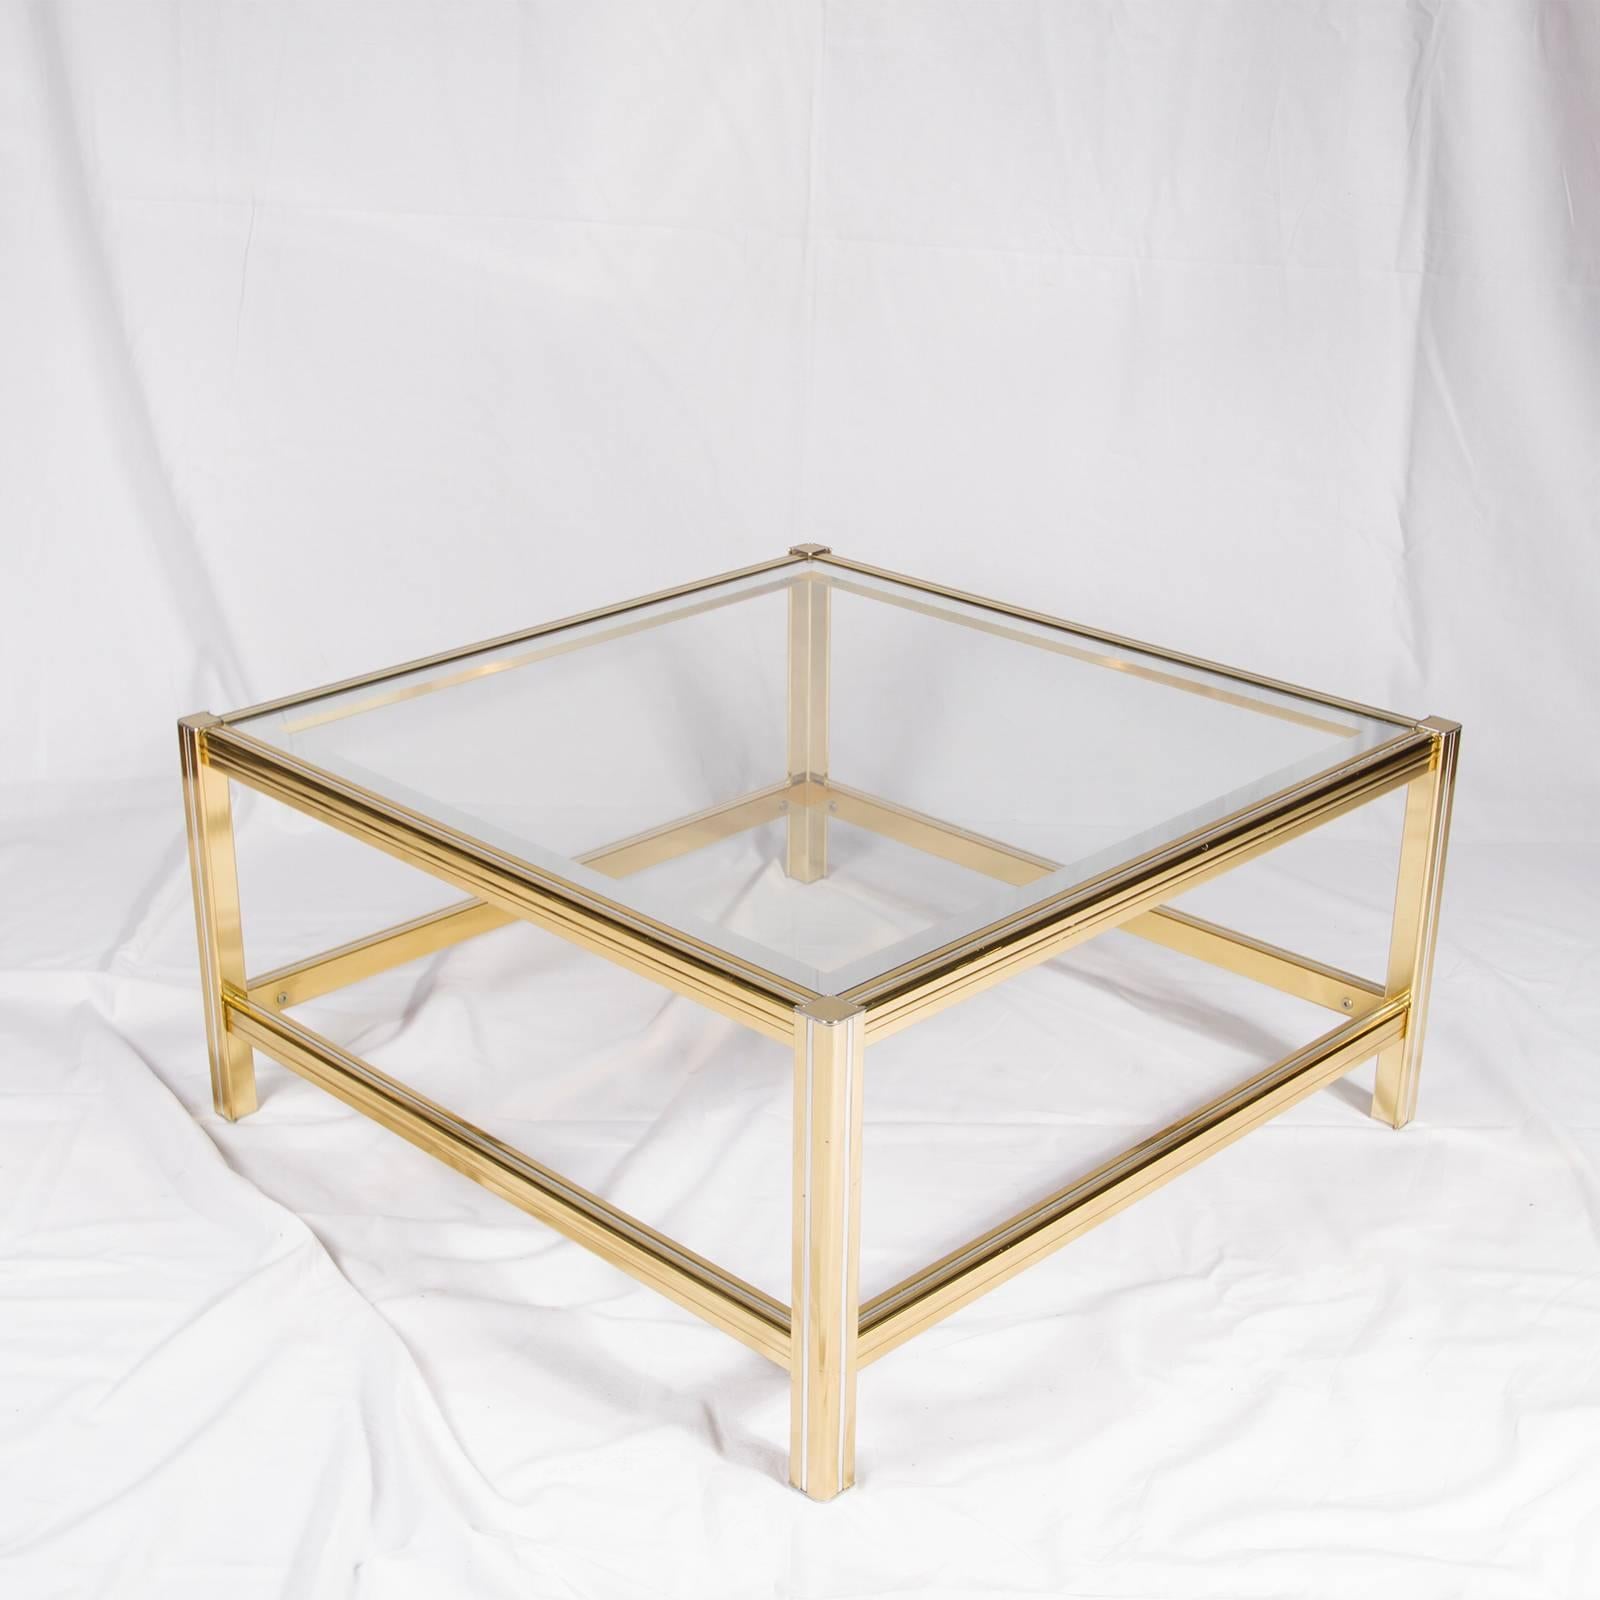 Magnificent end table, golden and silver metal with two glass shelves lined with mirror.

Please contact us for delivery details.